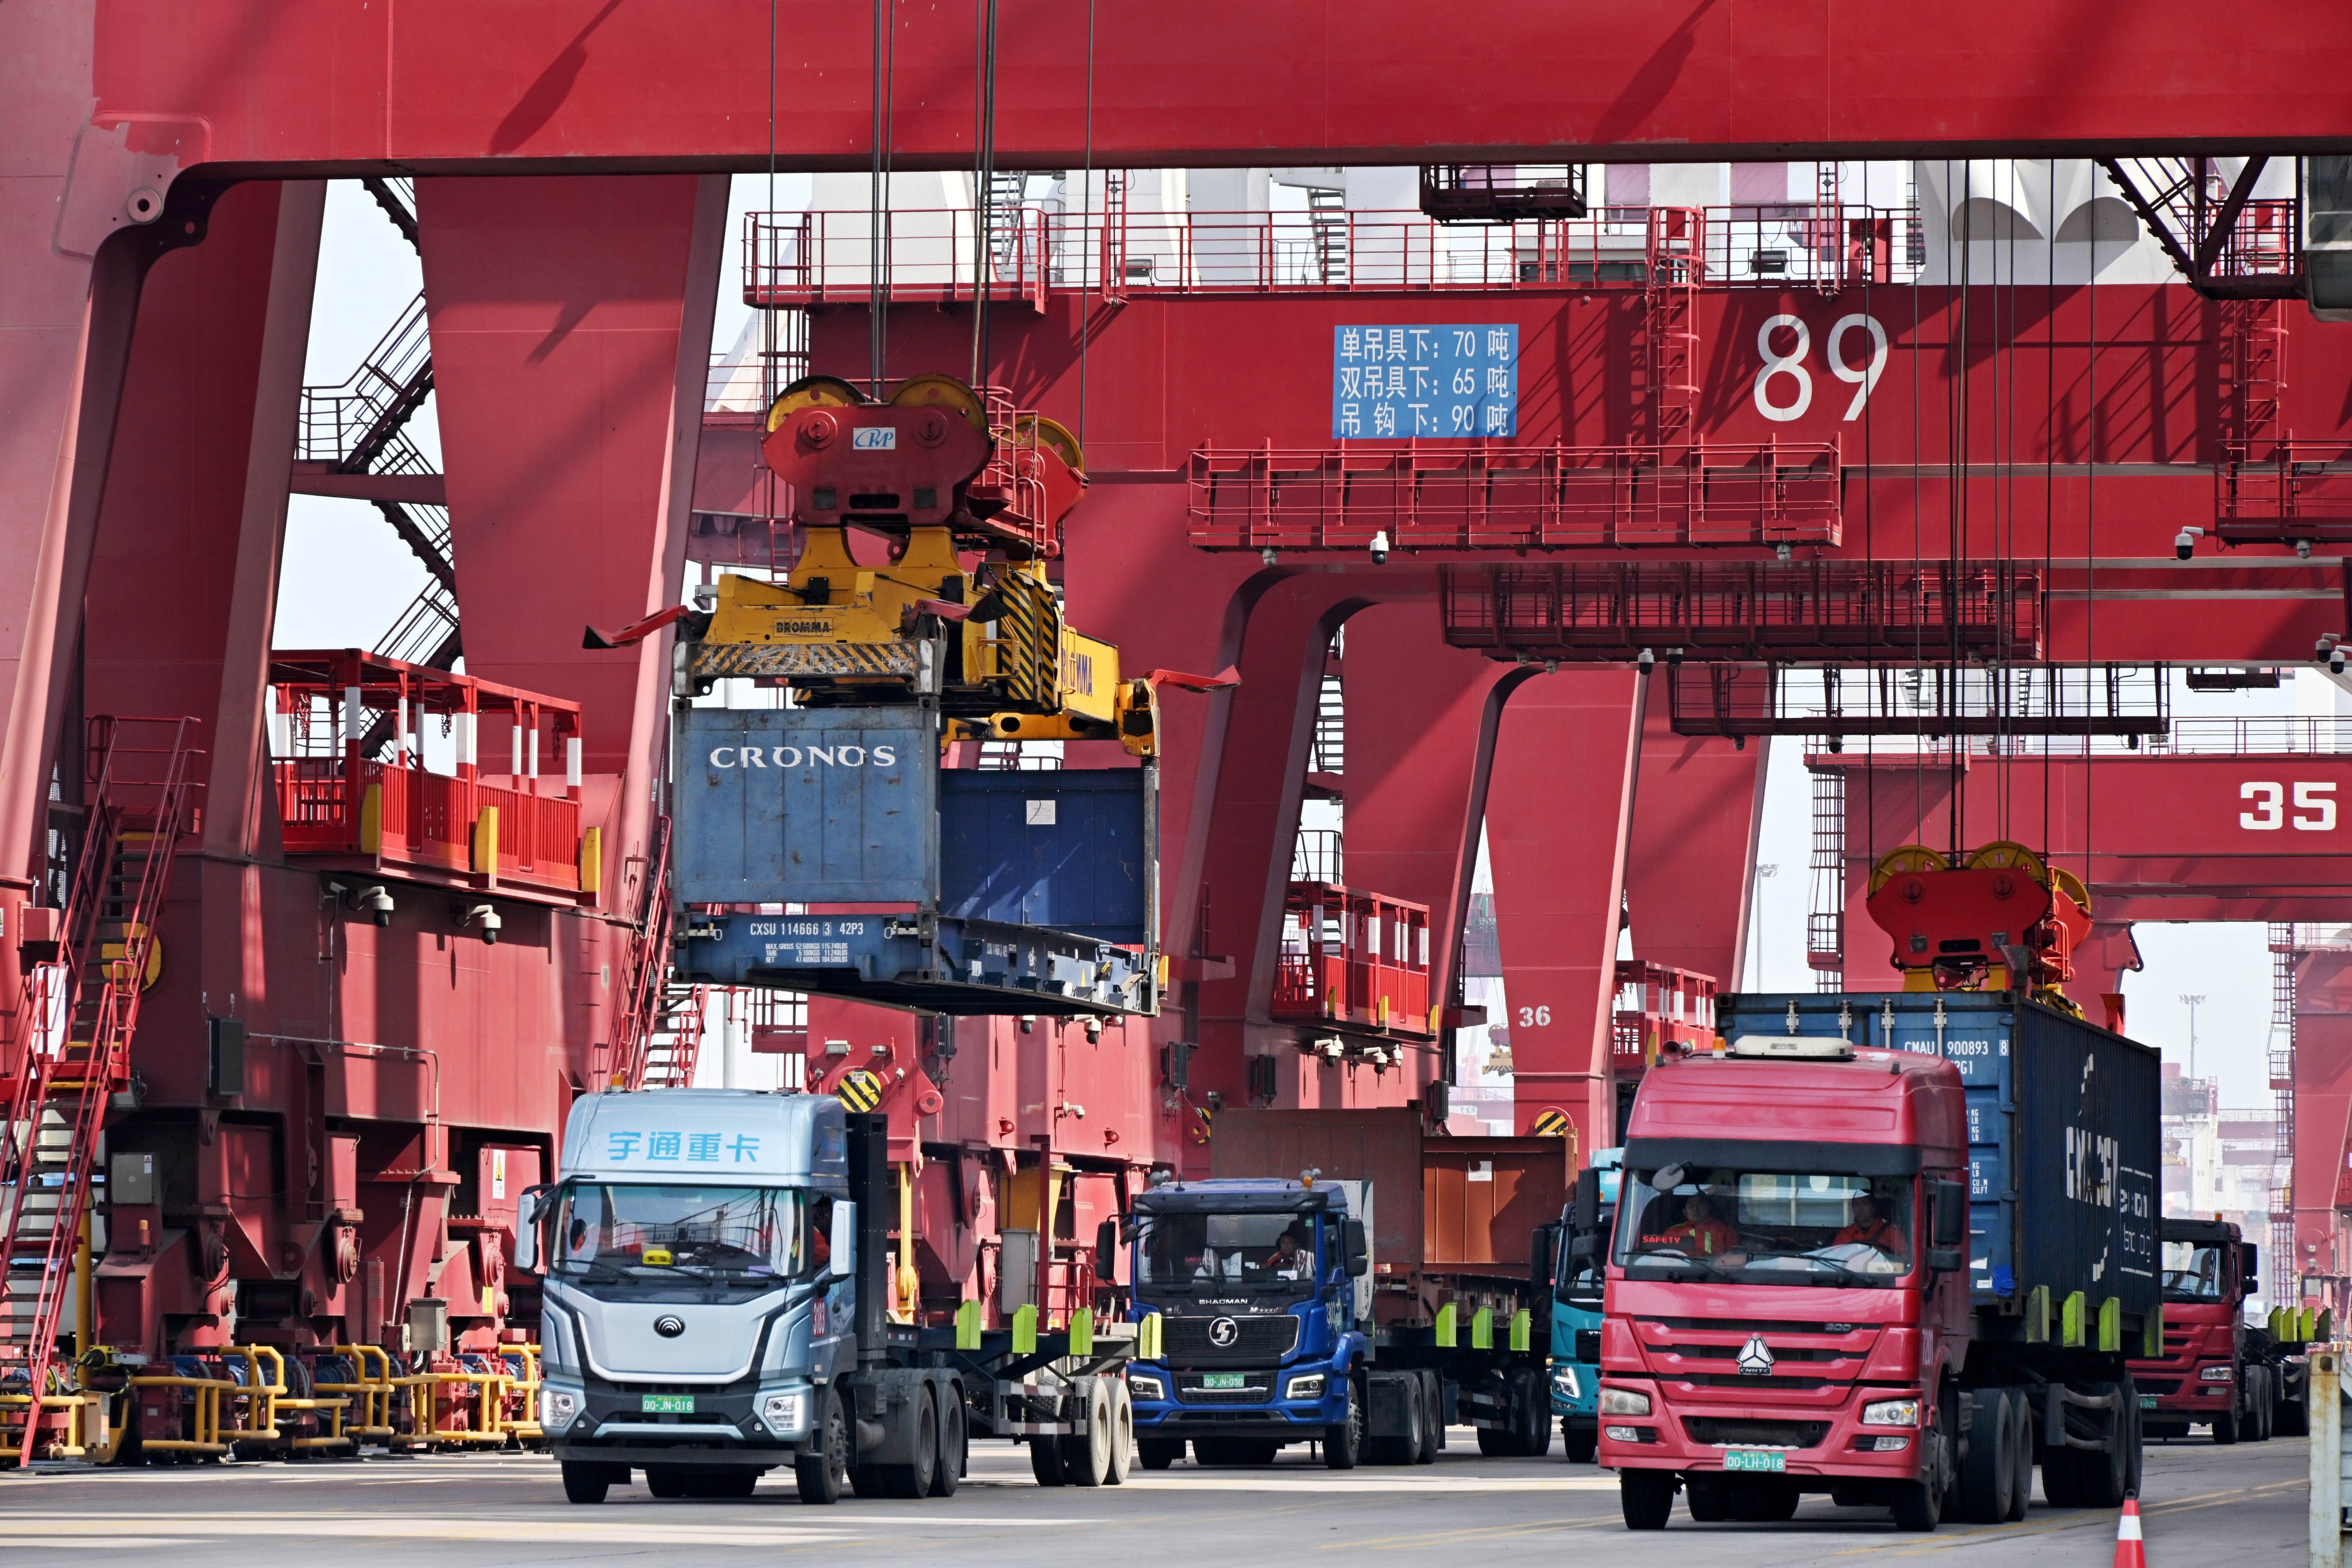 Trucks haul containers at the port of Qingdao in Shandong province in eastern China. Photo: Xinhua